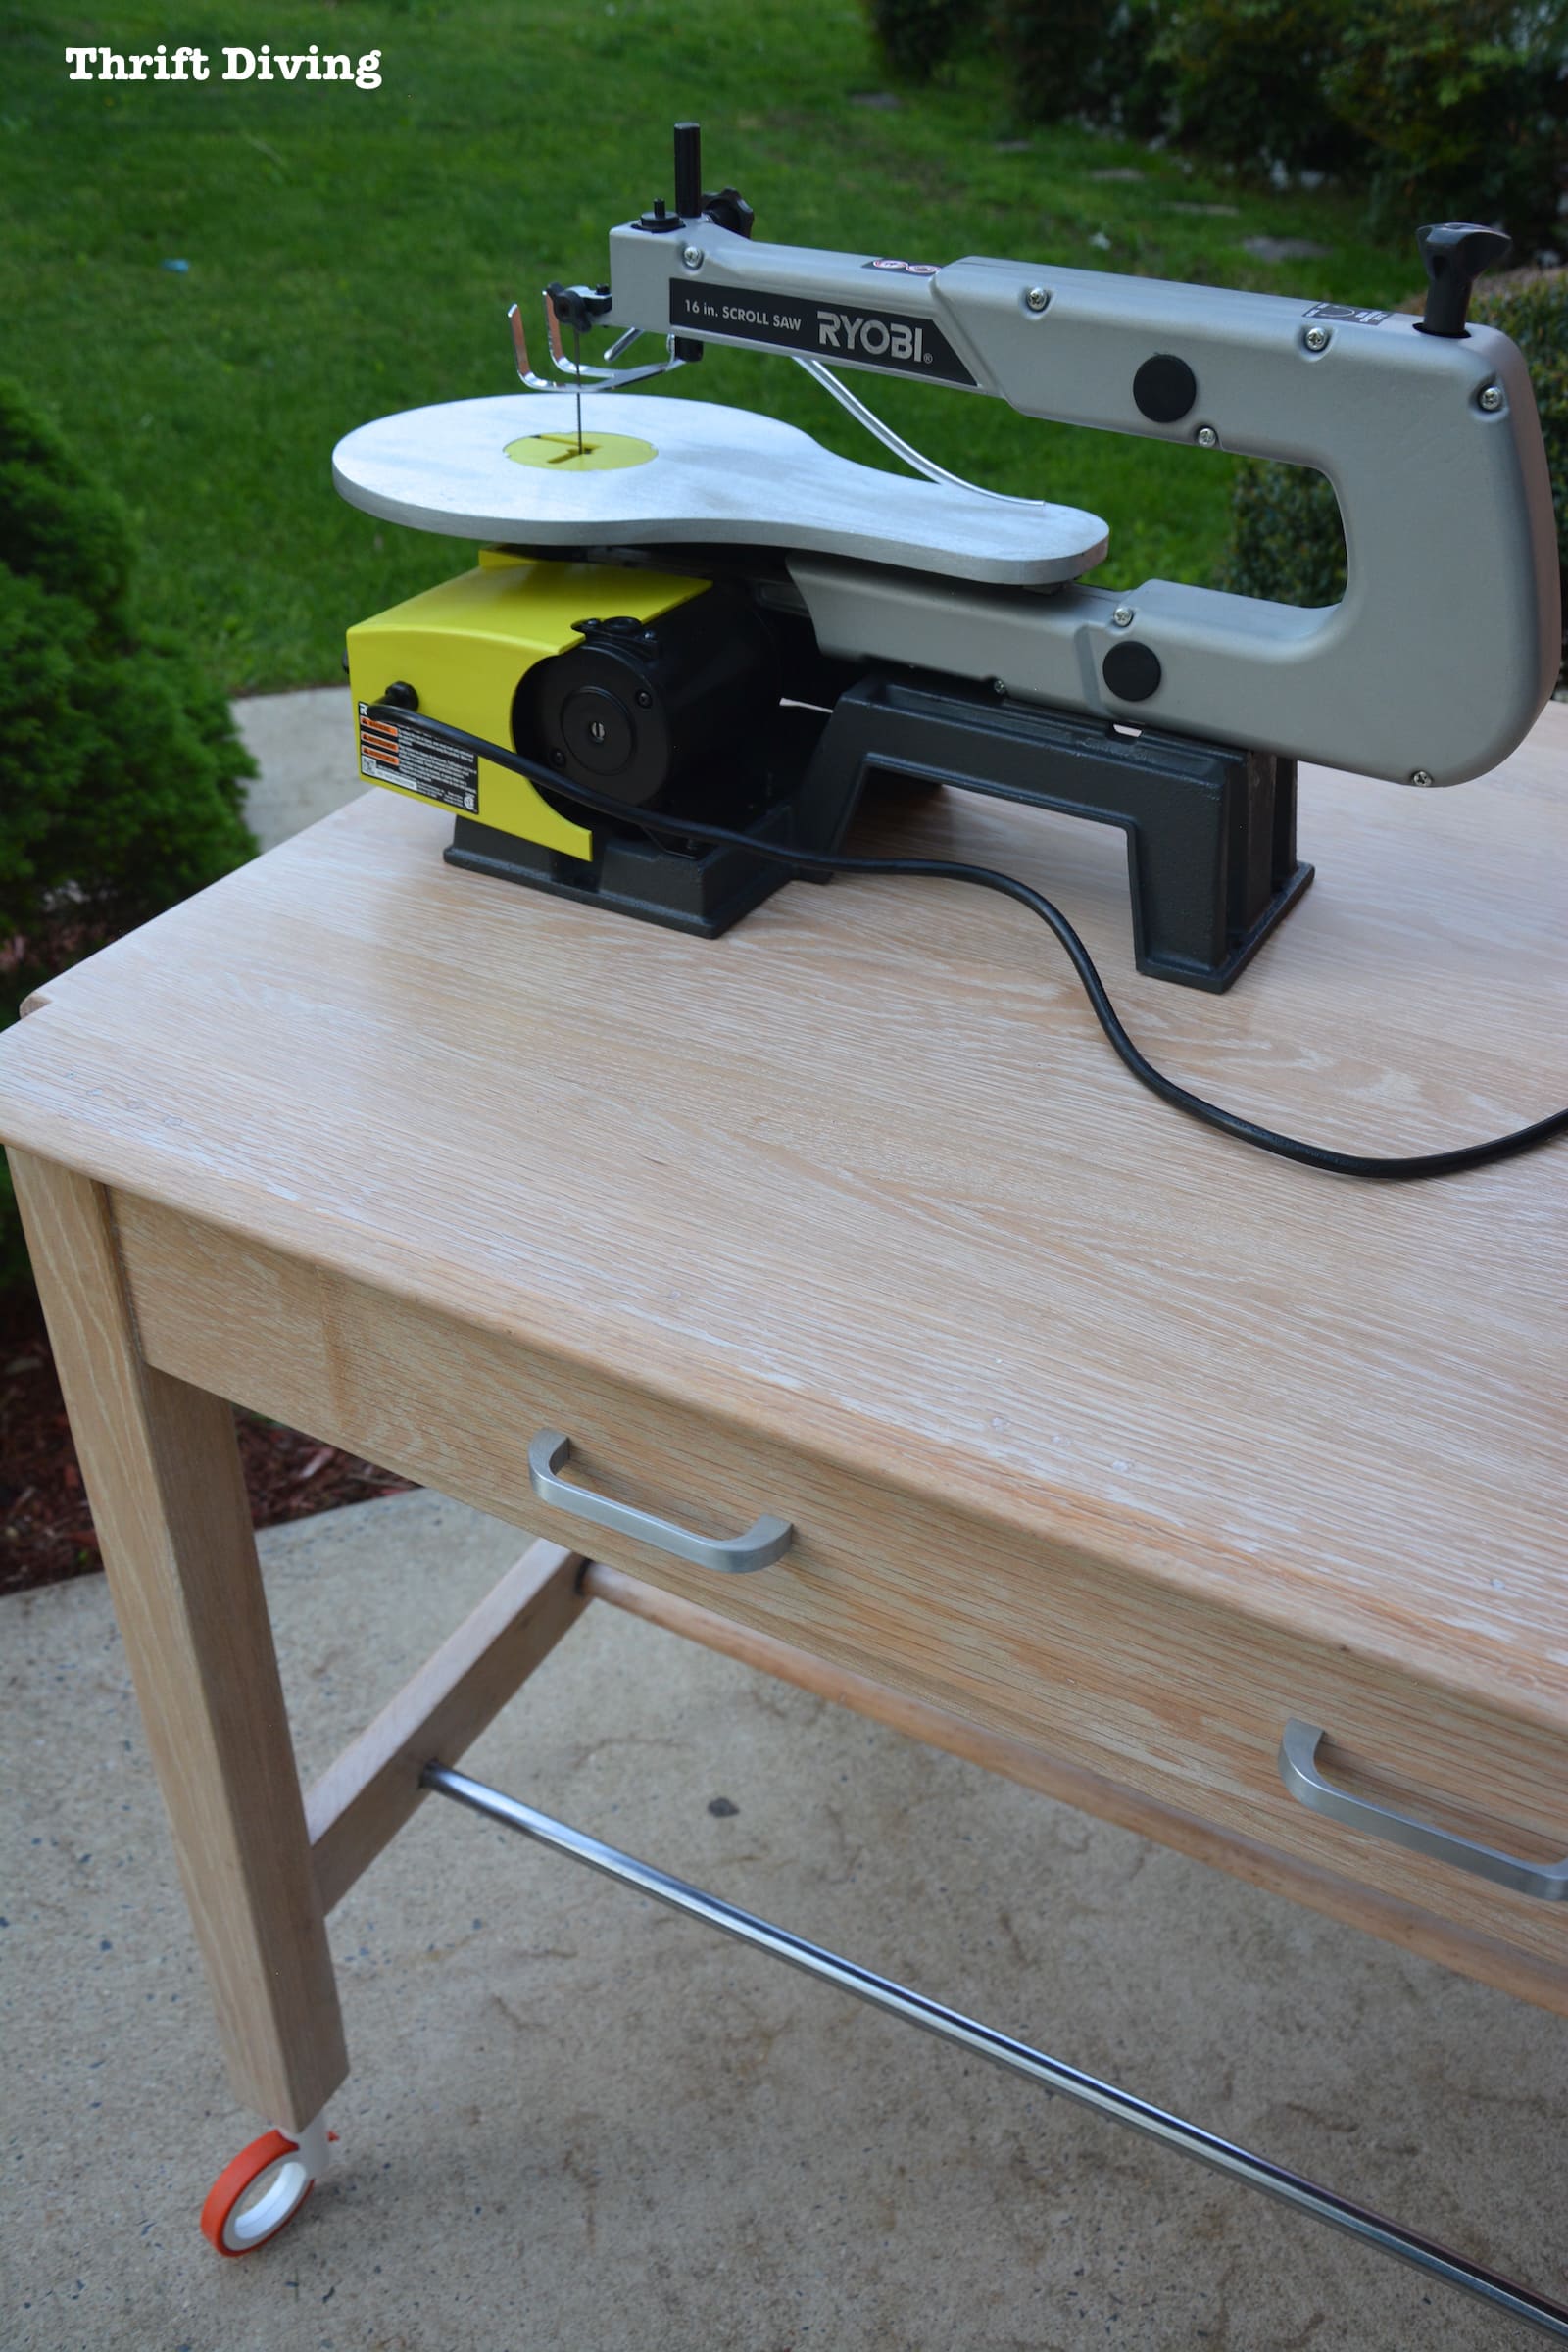 Strip furniture back to its natural wood - Turn a thrifted drafting table into a DIY garage workstation | Thrift Diving